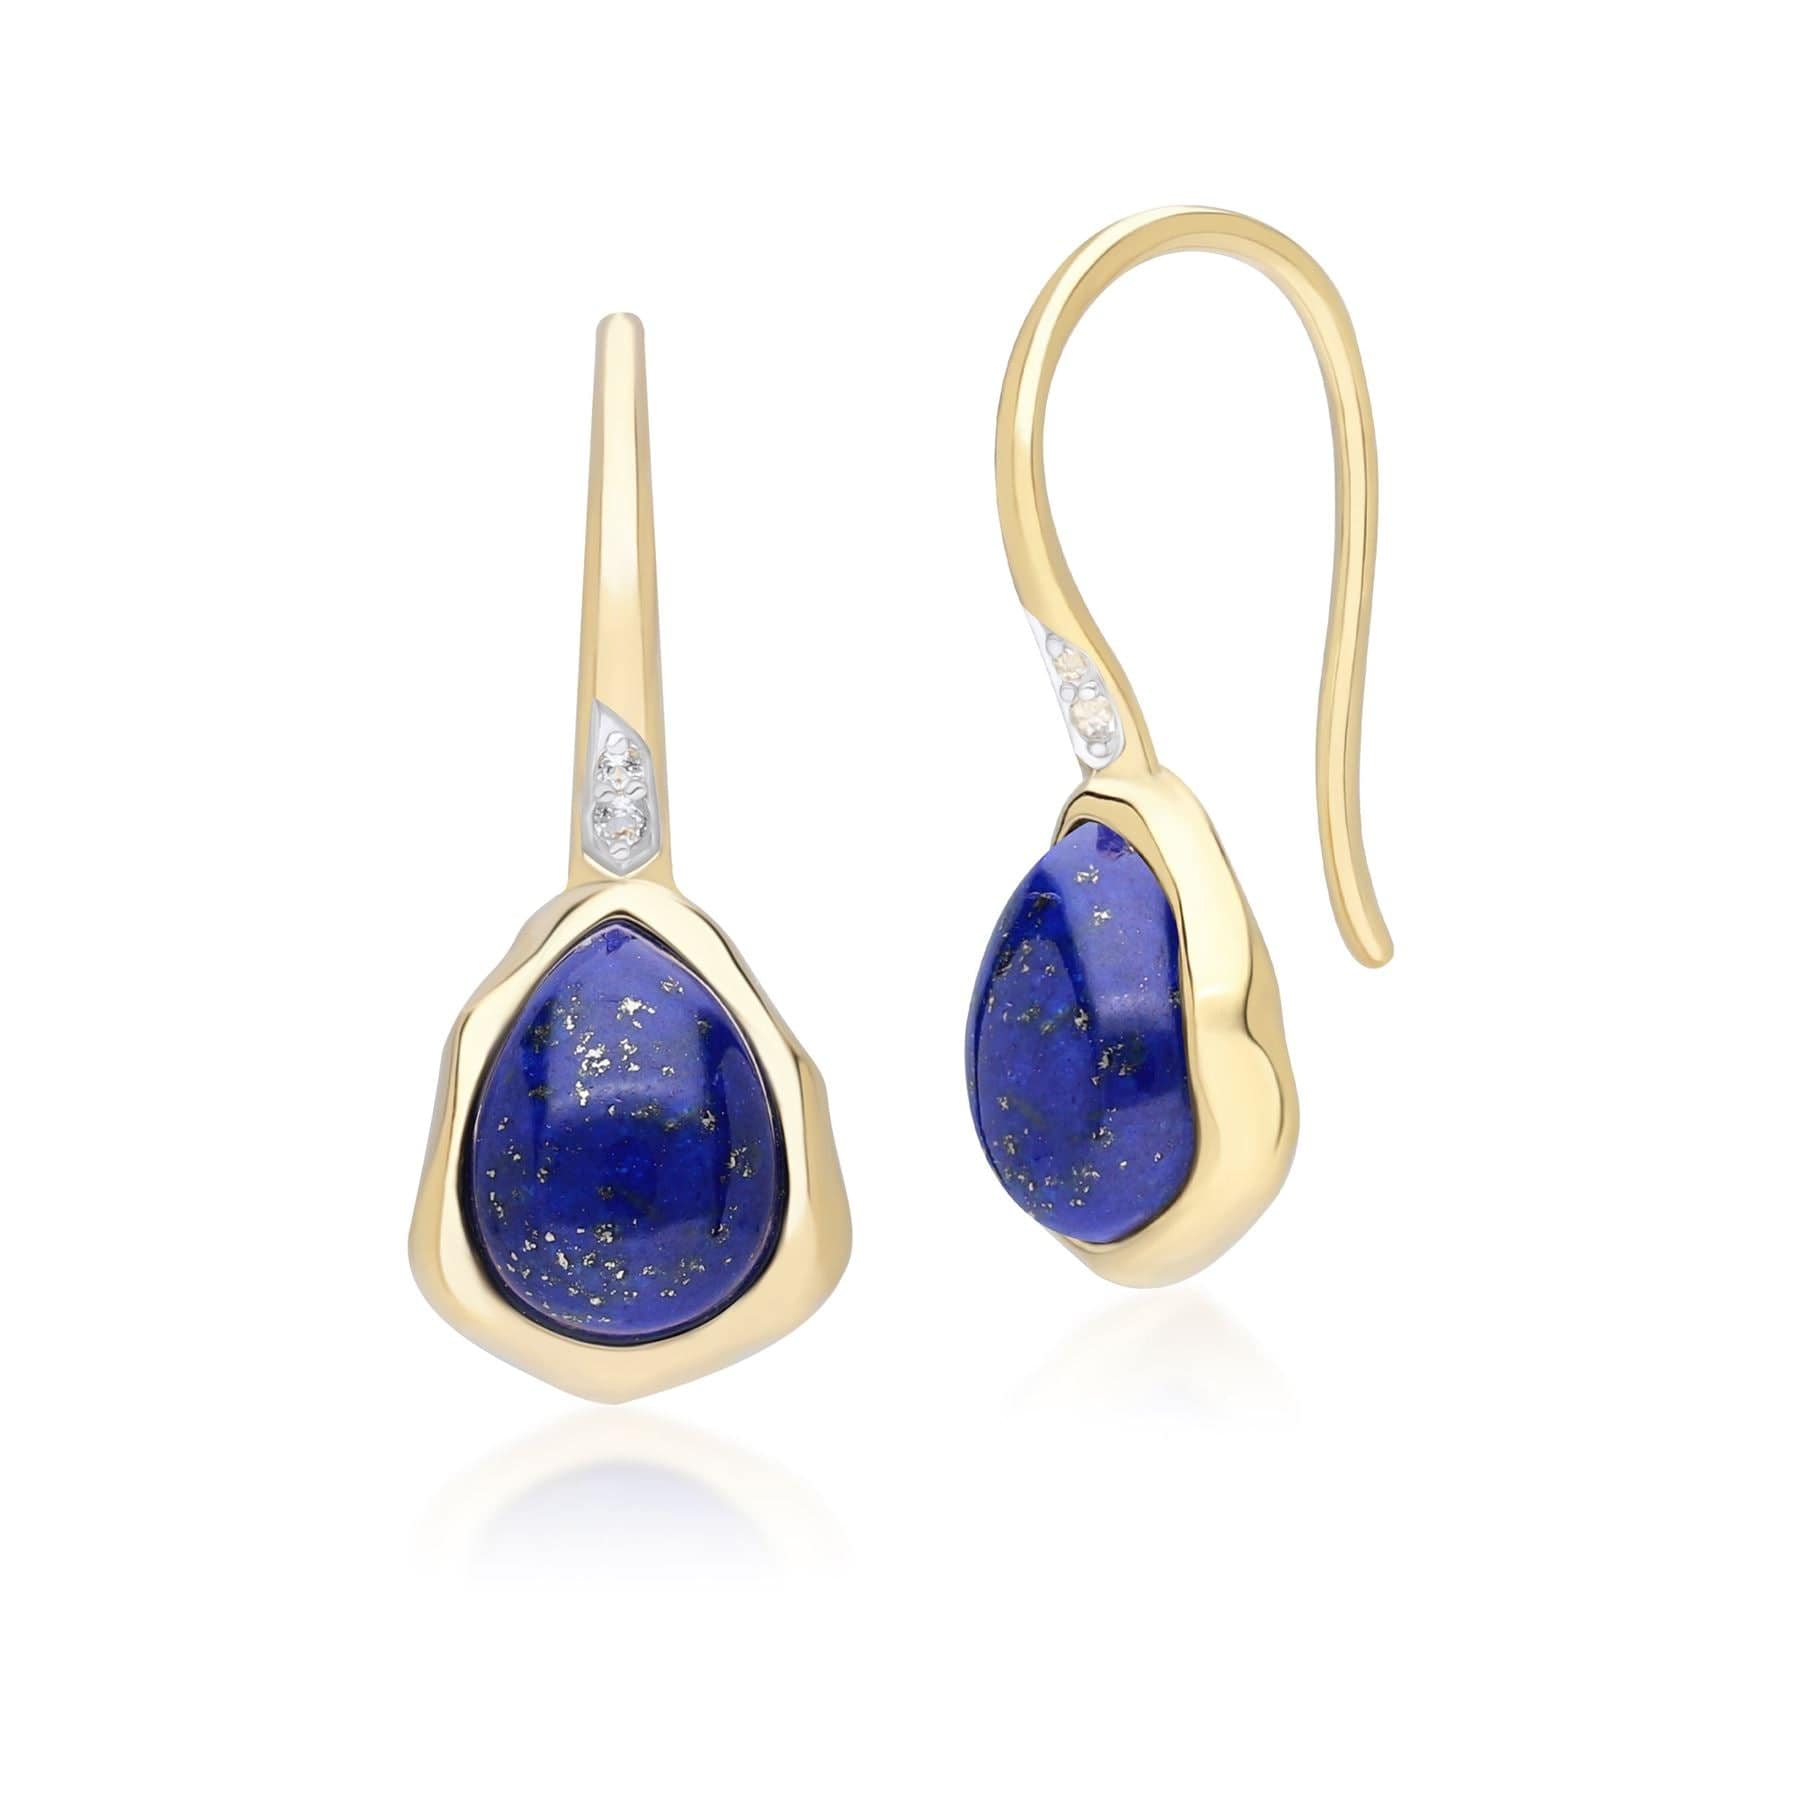 253E418702925 Irregular Lapis Lazuli & Topaz  Drop Earrings In 18ct Gold Plated SterlIng Silver Front